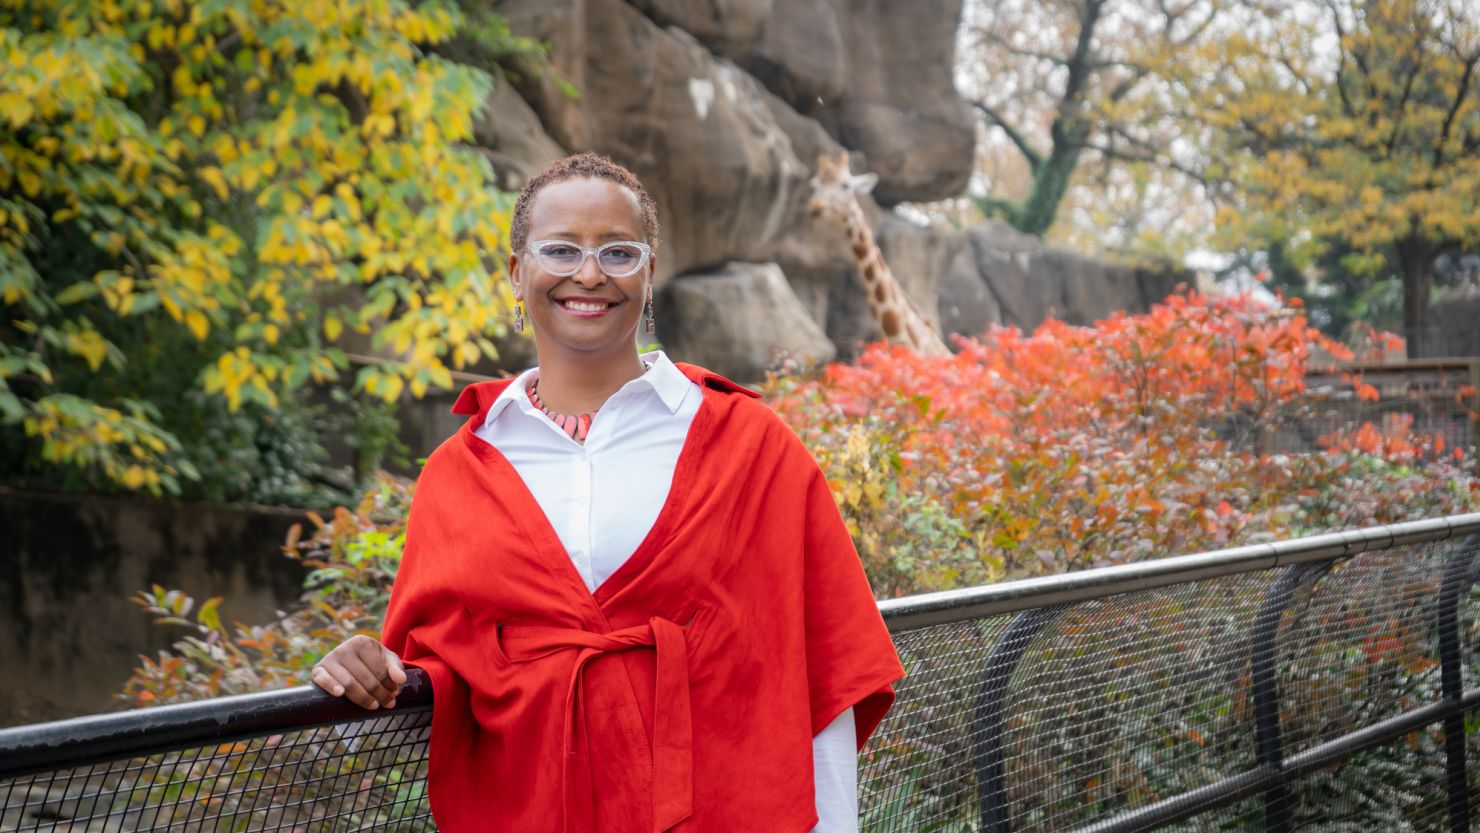 Dr. Jo-Elle Morgerman is the new president and CEO of the Philadelphia Zoo.